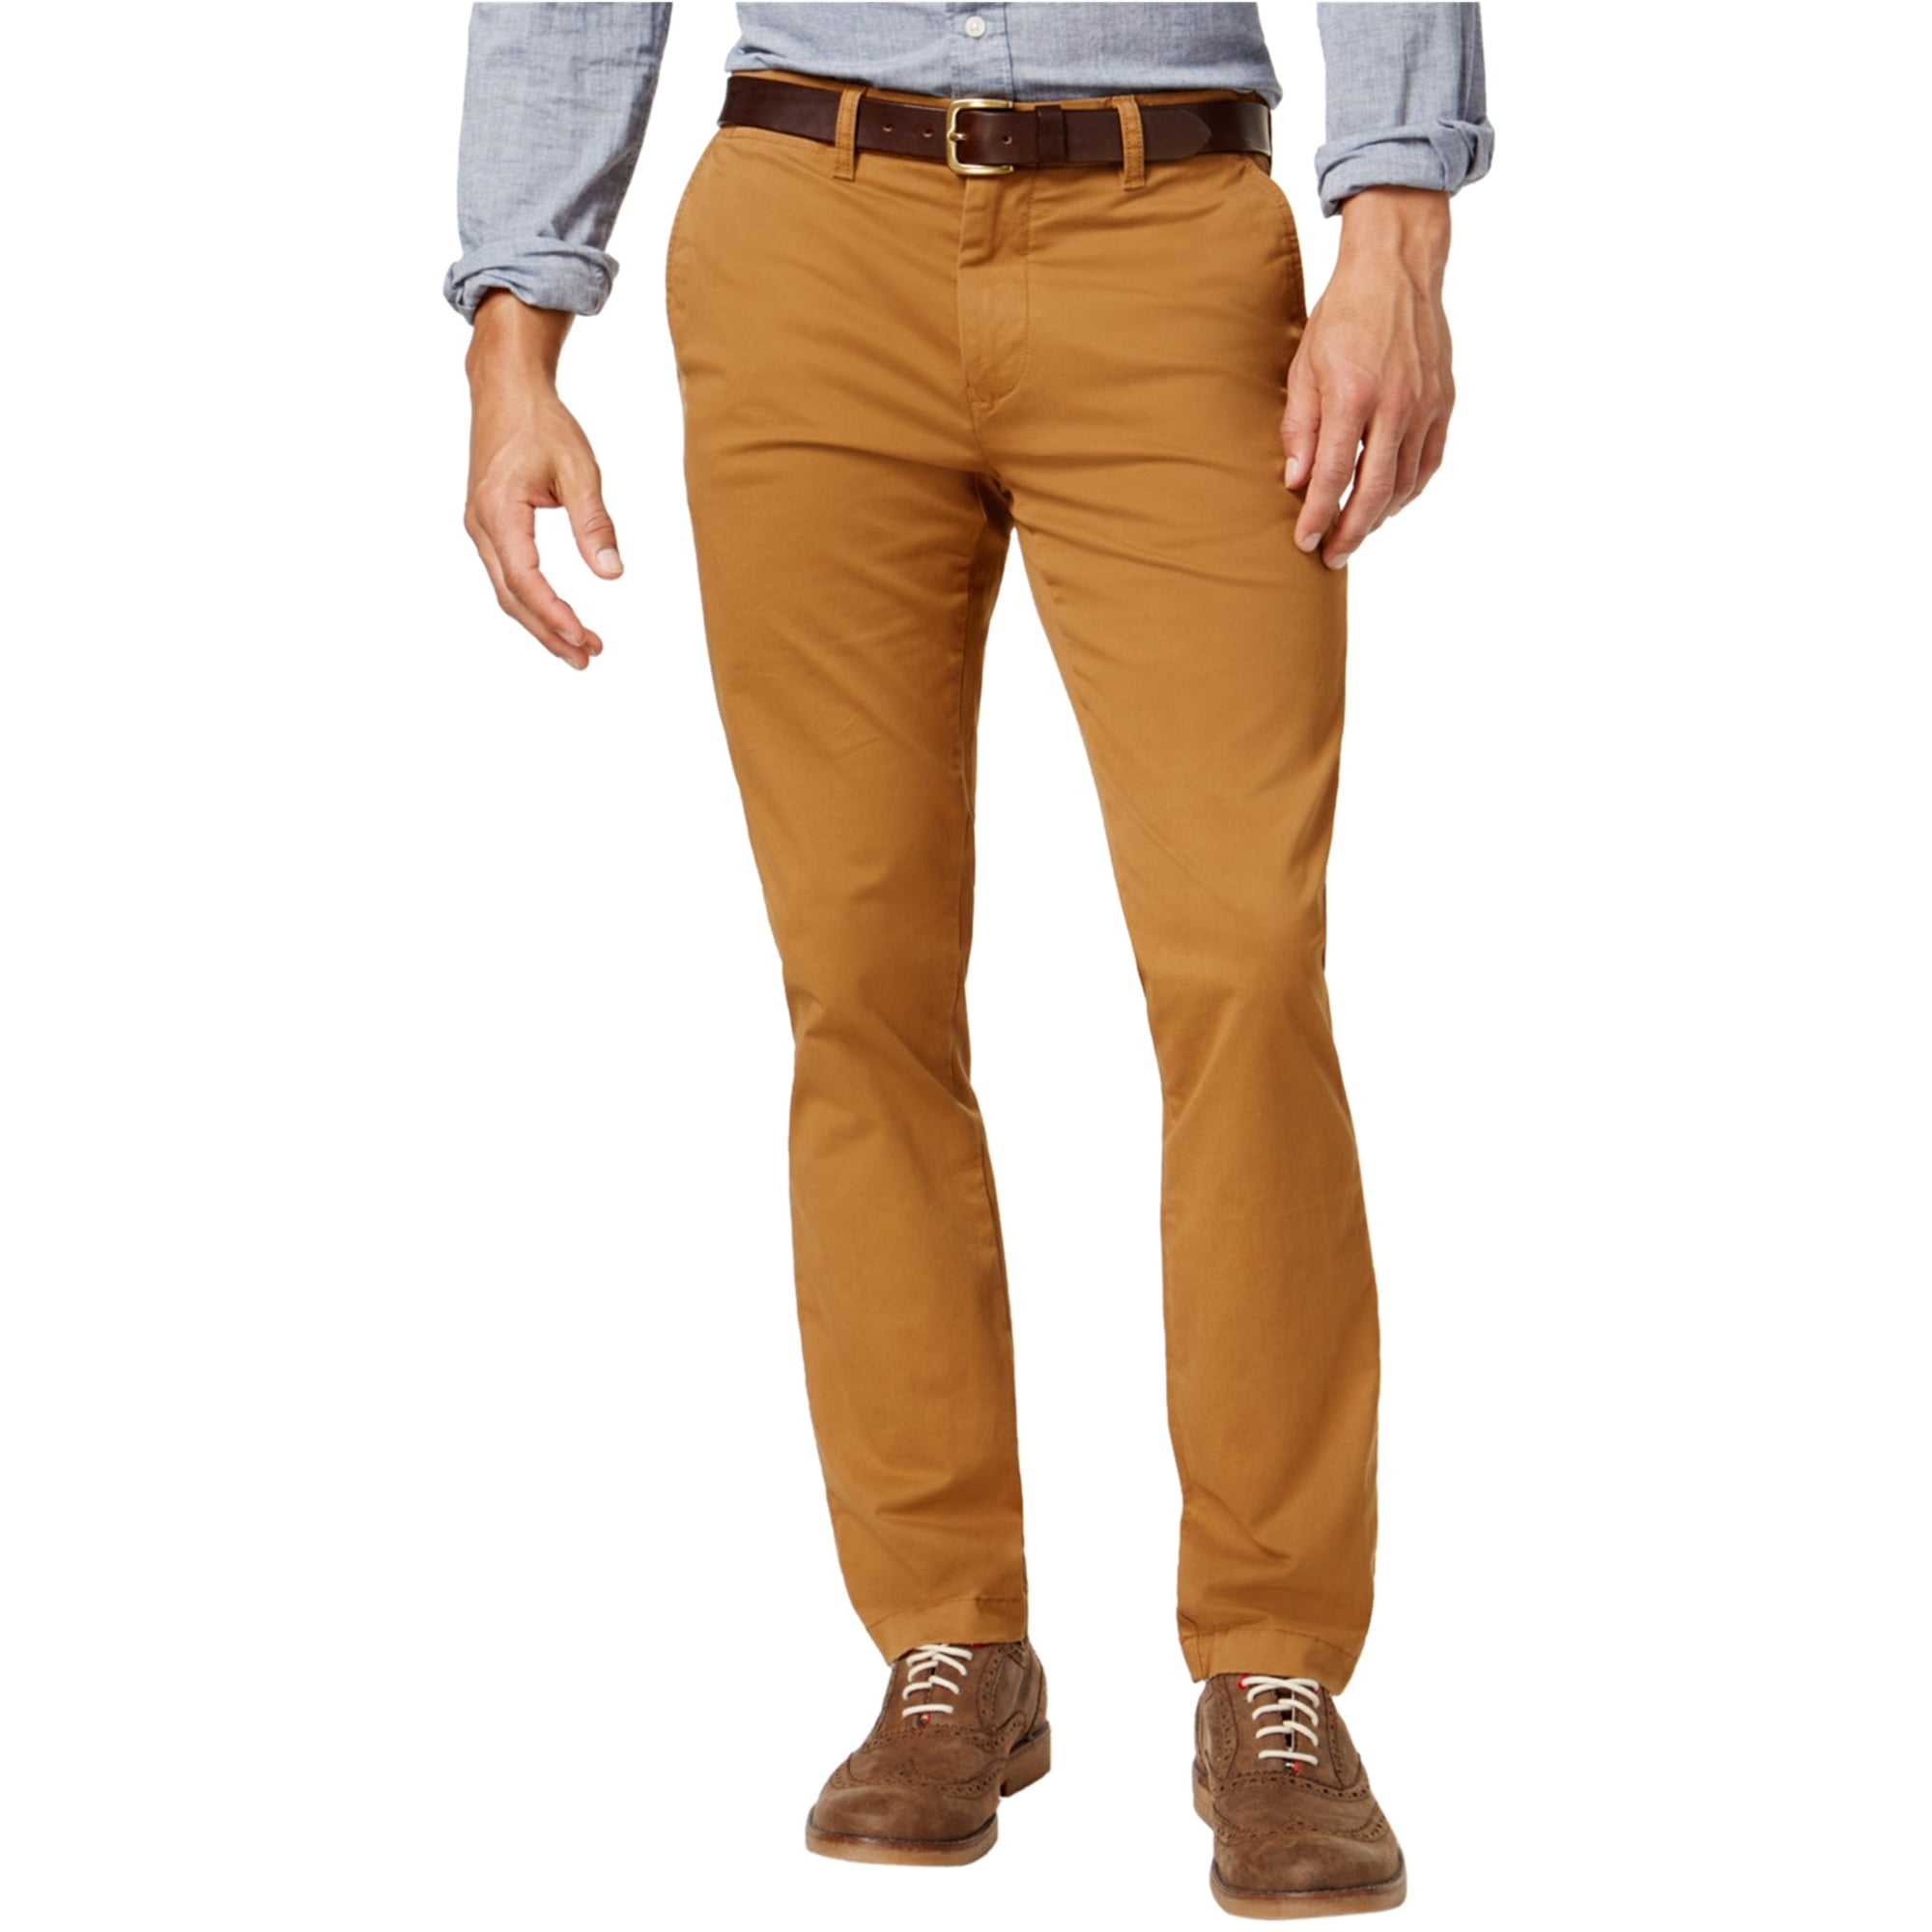 Tommy Hilfiger - Tommy Hilfiger Mens Stretch Casual Chino Pants, Brown ...